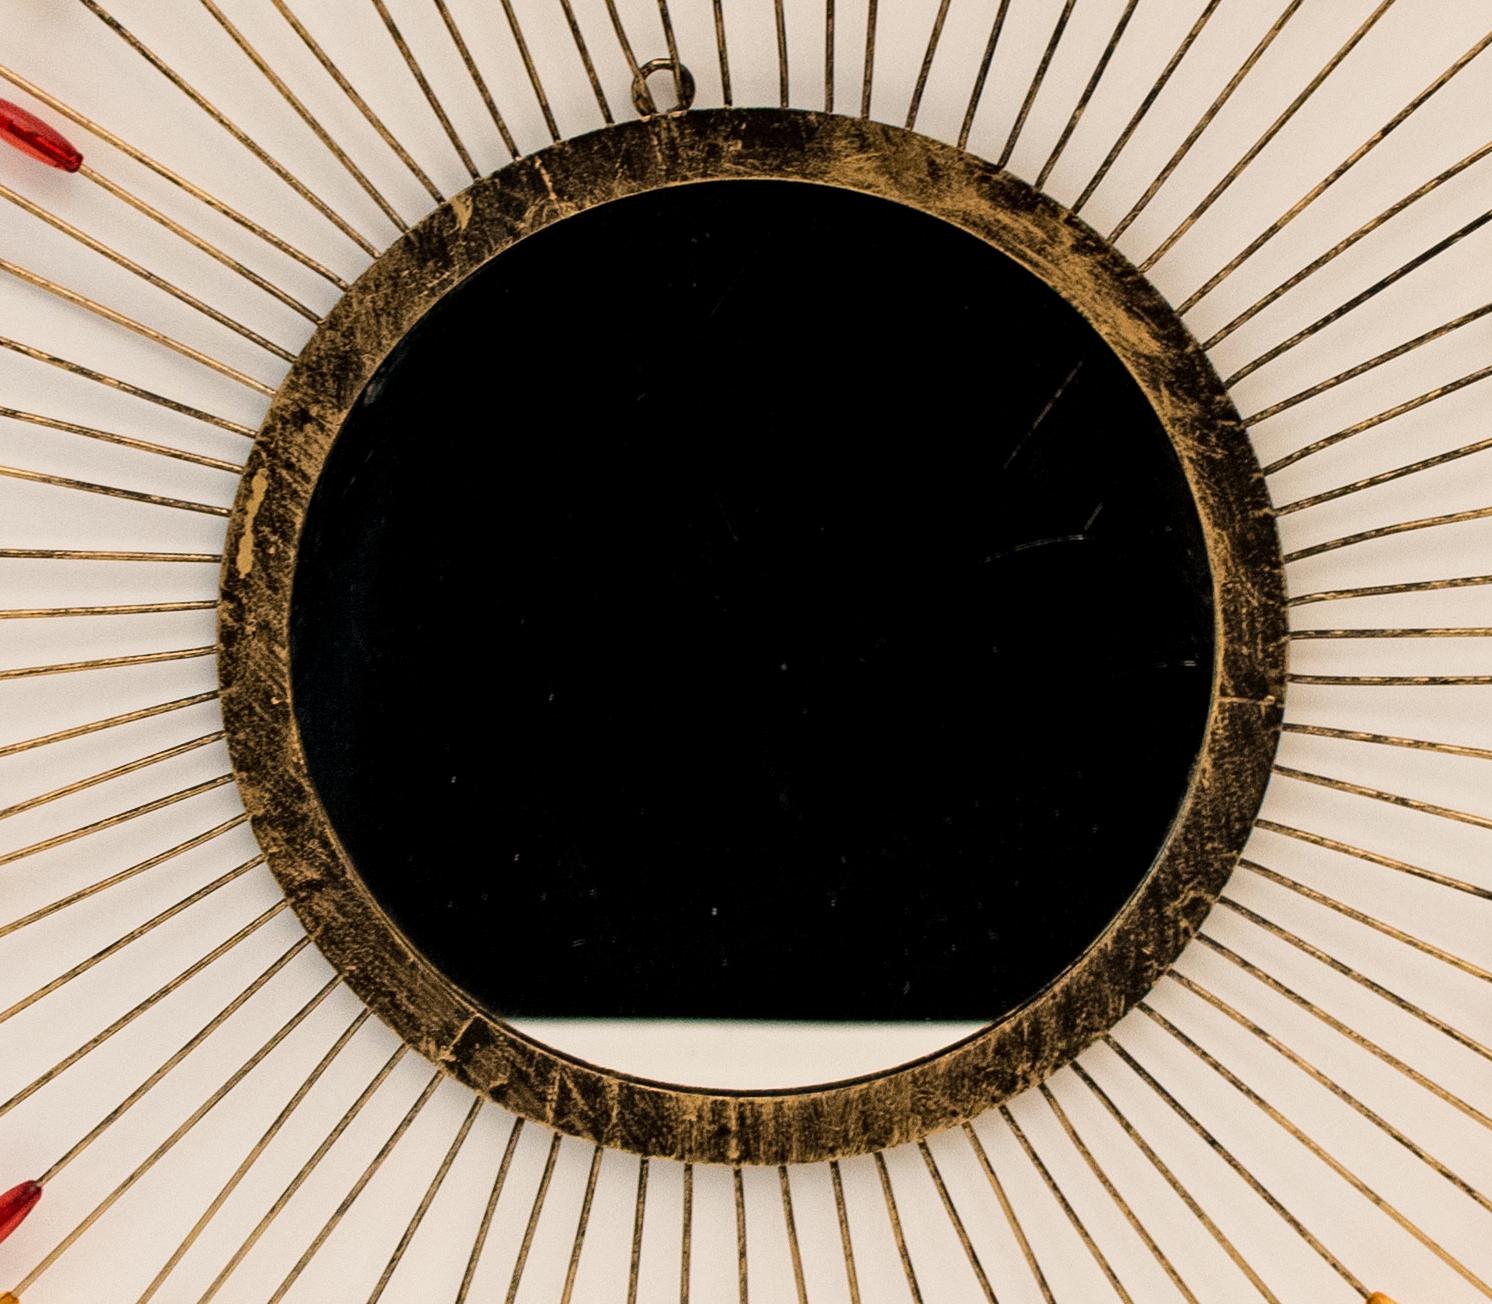 Vintage design
- Sun mirror from the 1960s
- Designed in the style of Line Vautrin
- Colorful plastic beads and metal leaves.